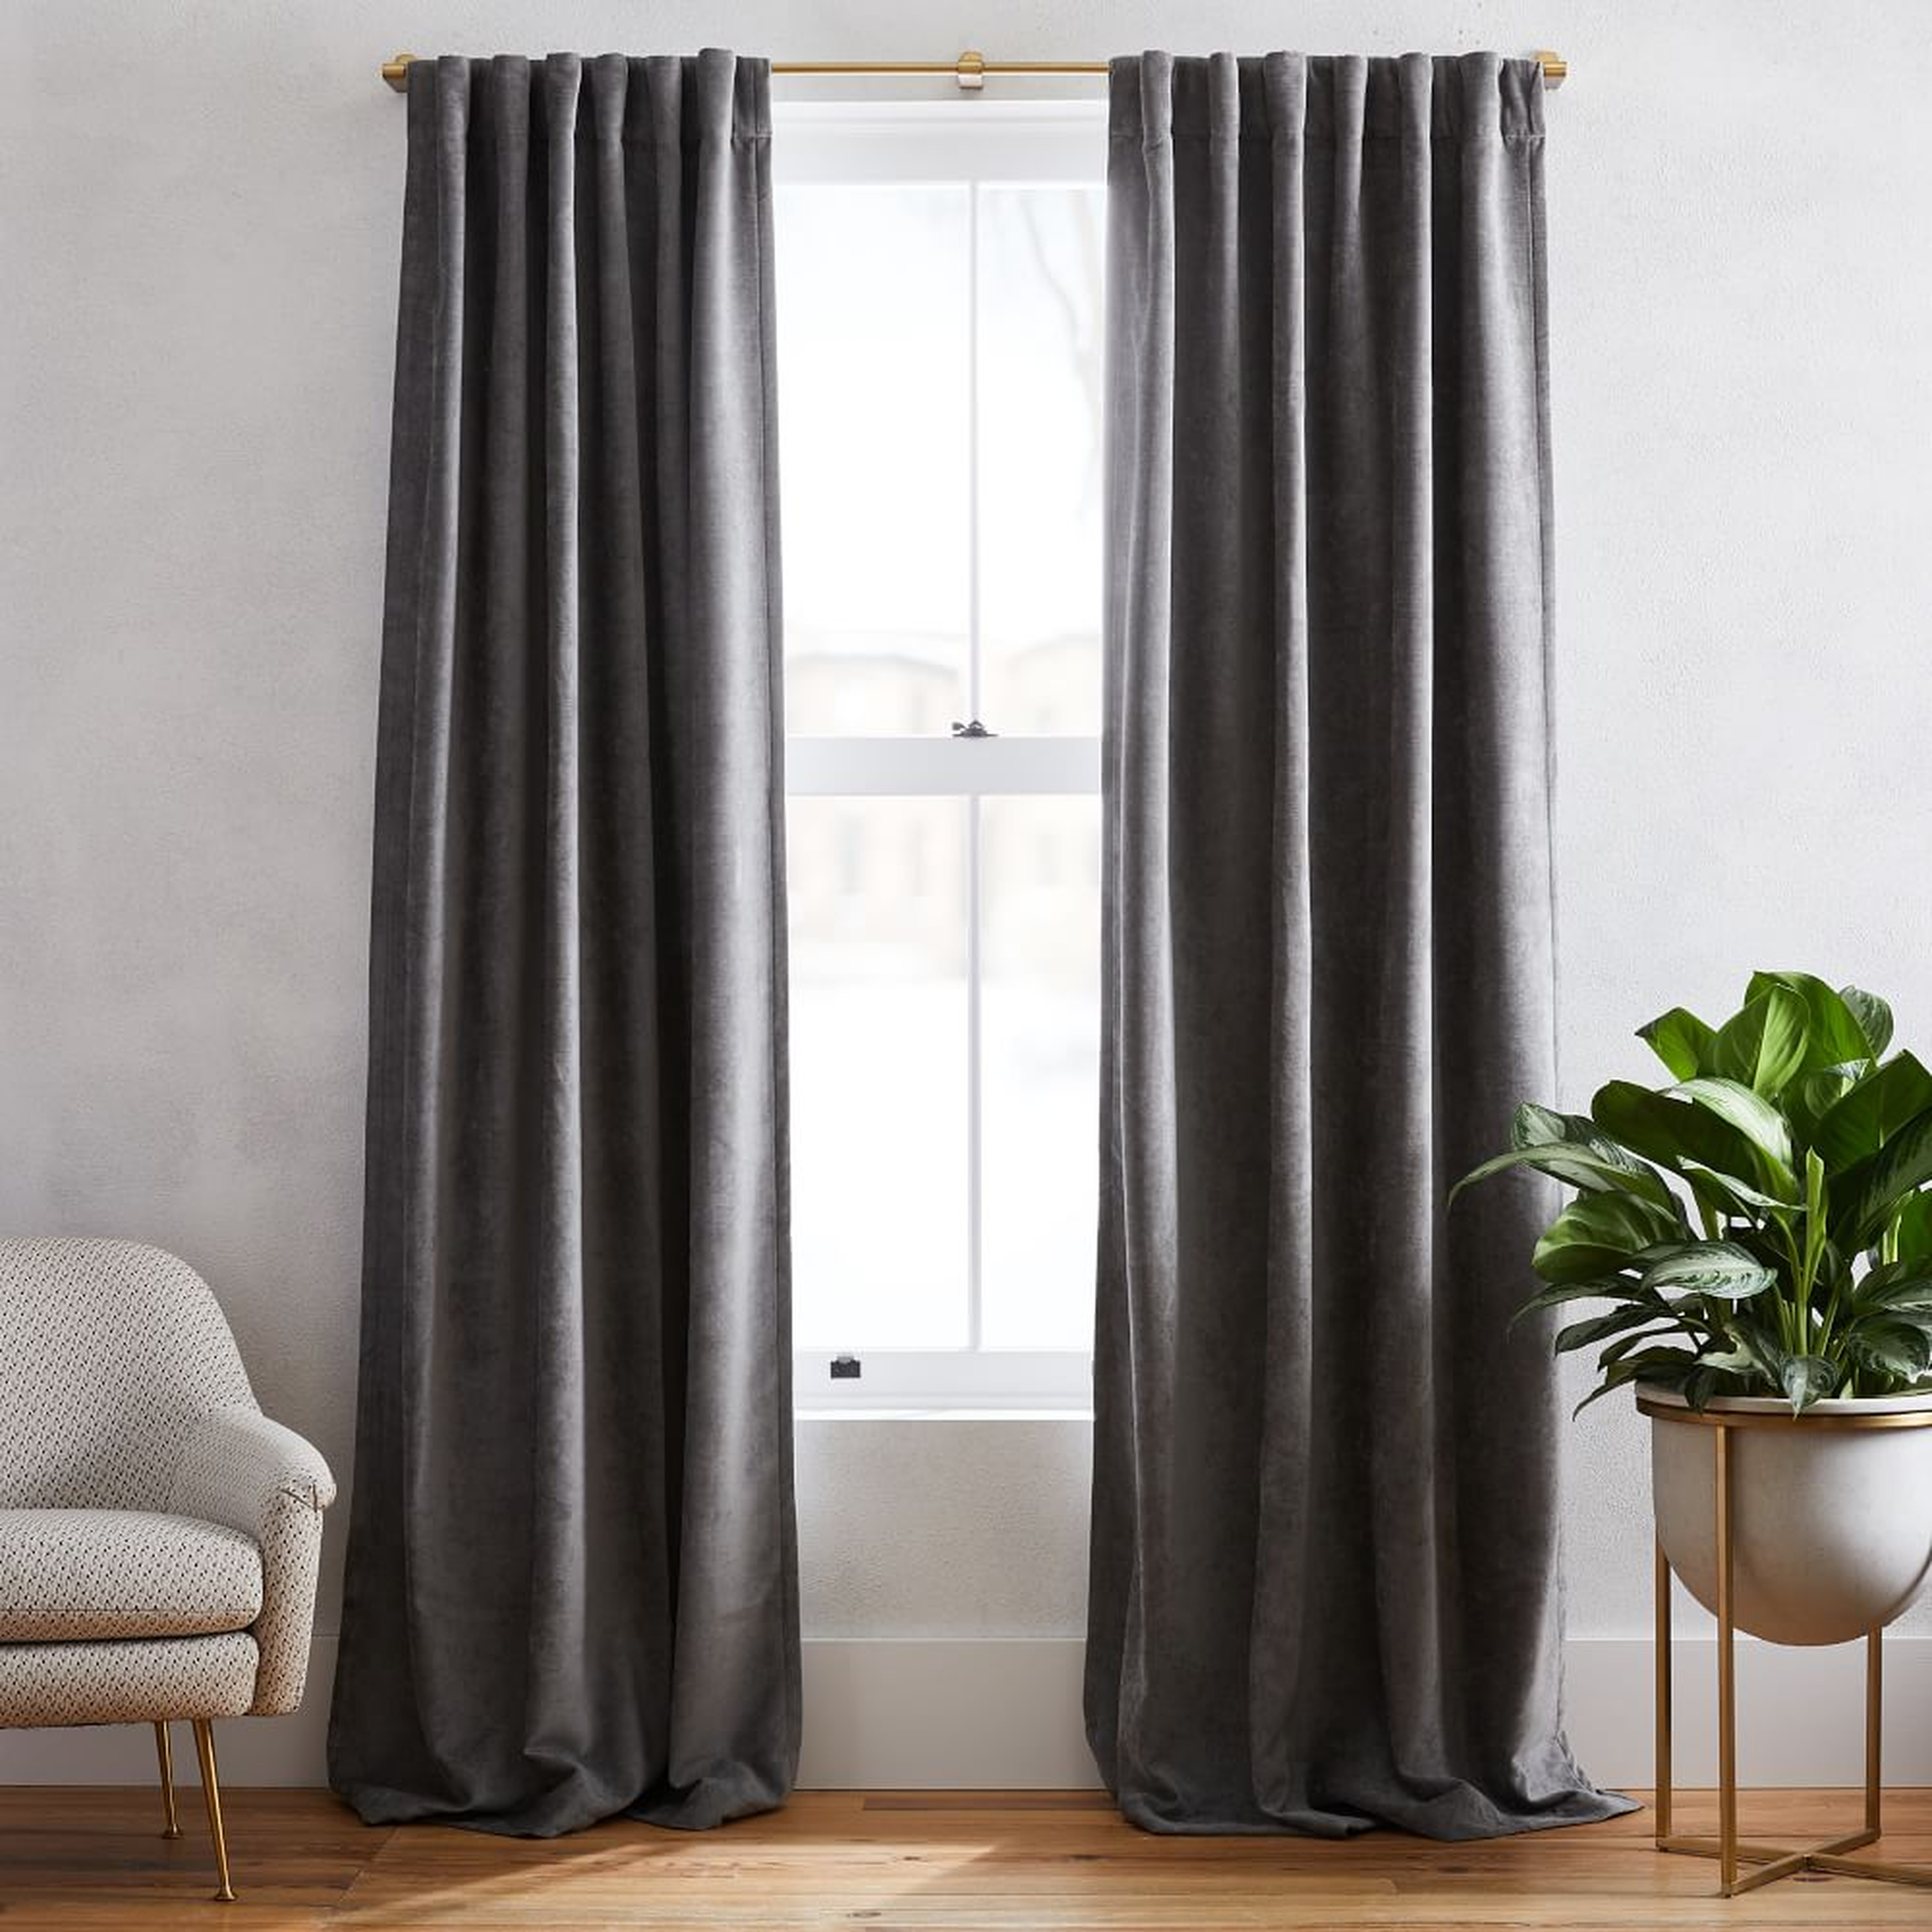 Worn Velvet Curtain with Blackout Lining, Metal, 48"x108", Set of 2 - West Elm